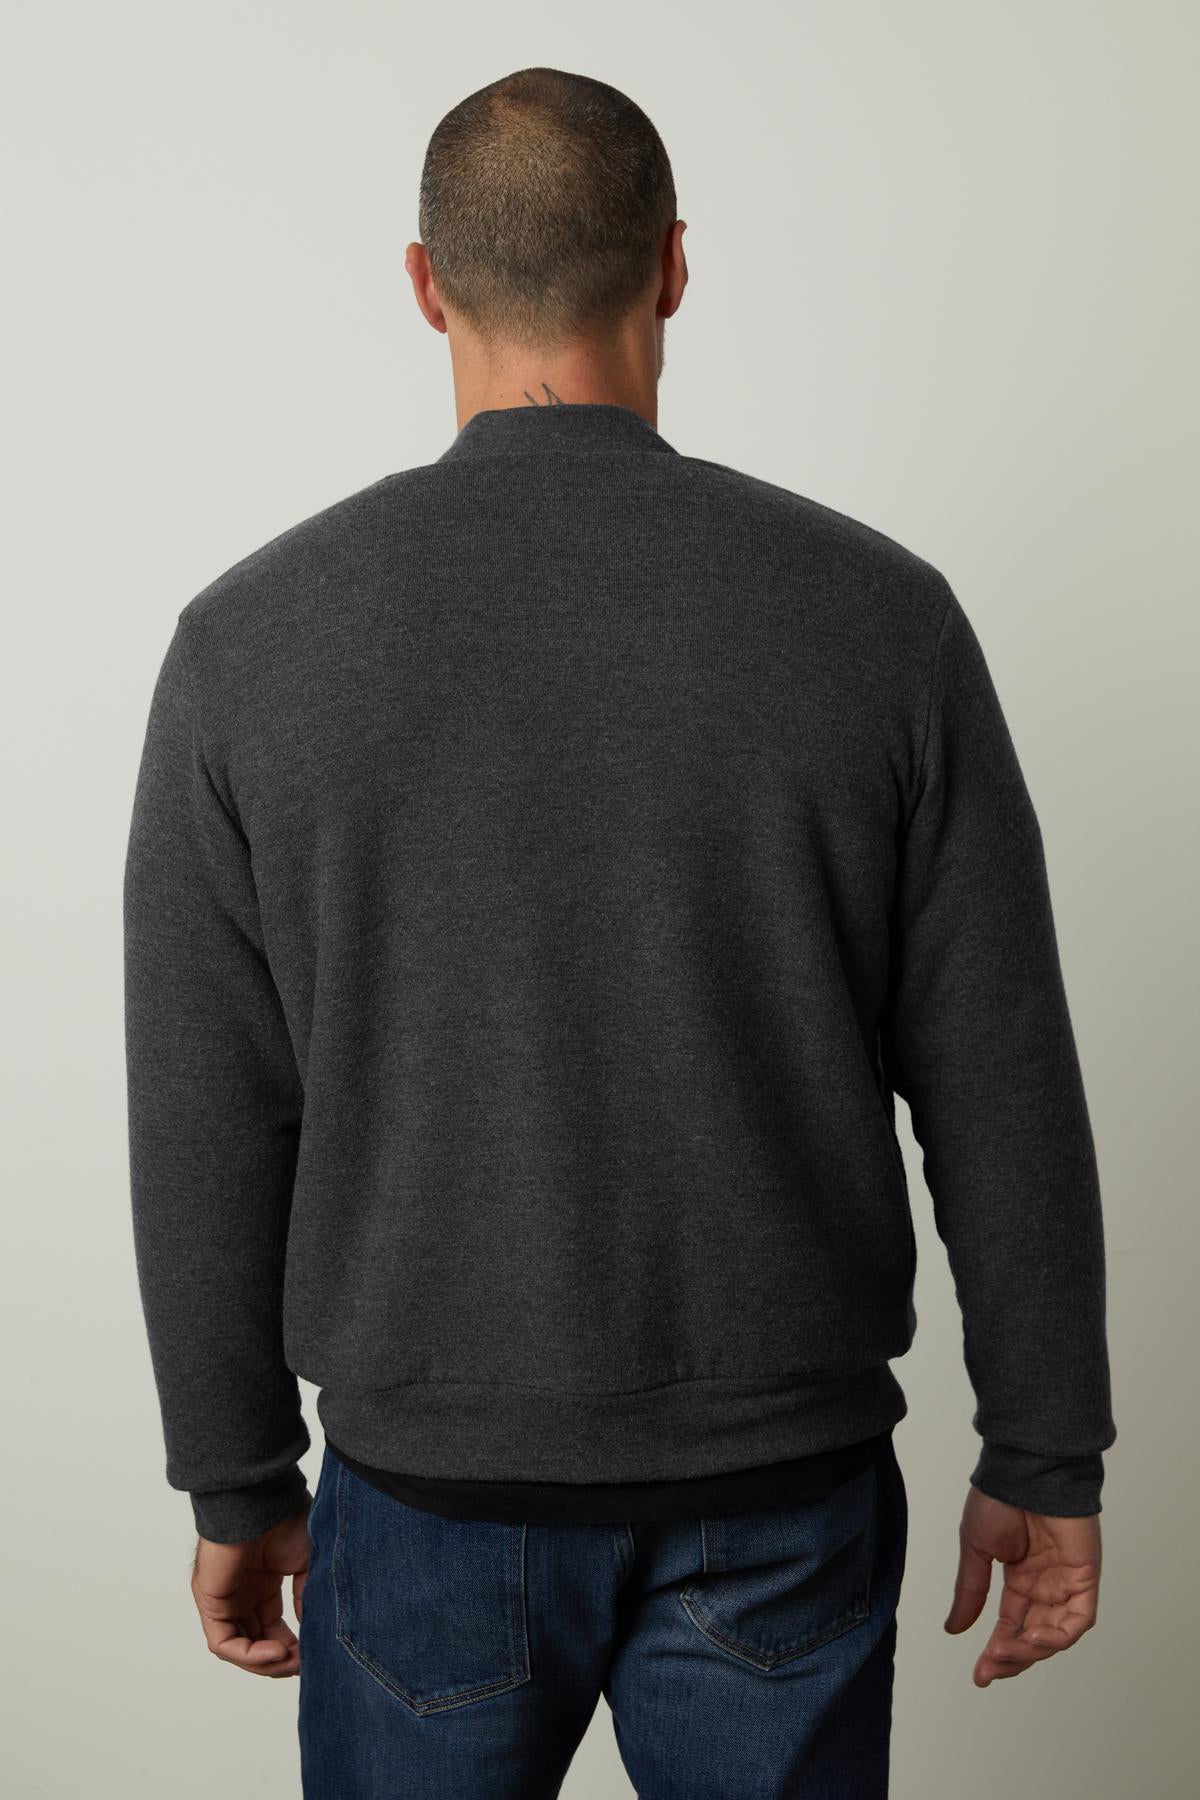   The back view of a man wearing a Velvet by Graham & Spencer MILES ZIP-UP JACKET with a cozy sherpa lining. 